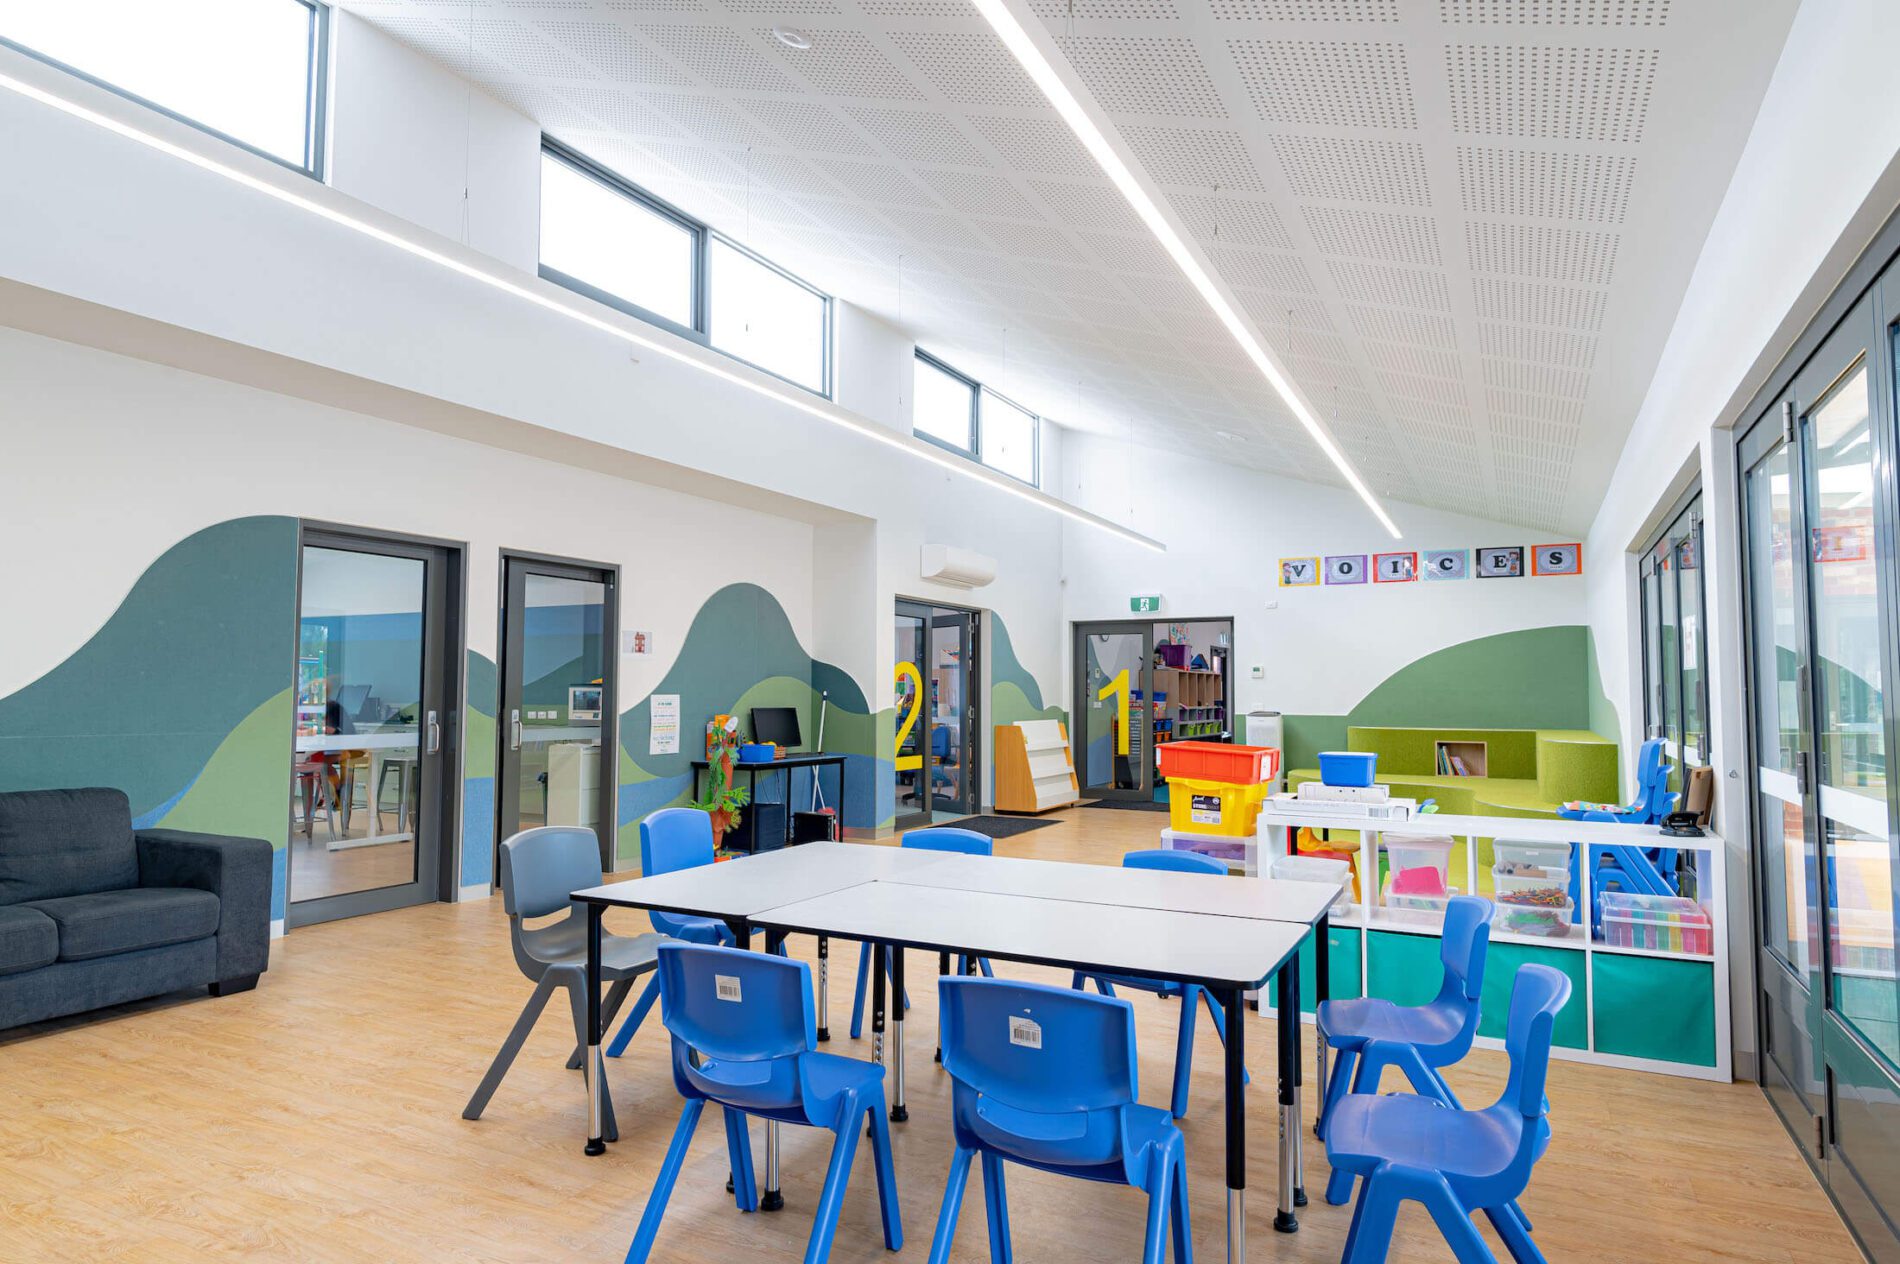 Reading and learning breakout areas with clerestory windows outside classrooms